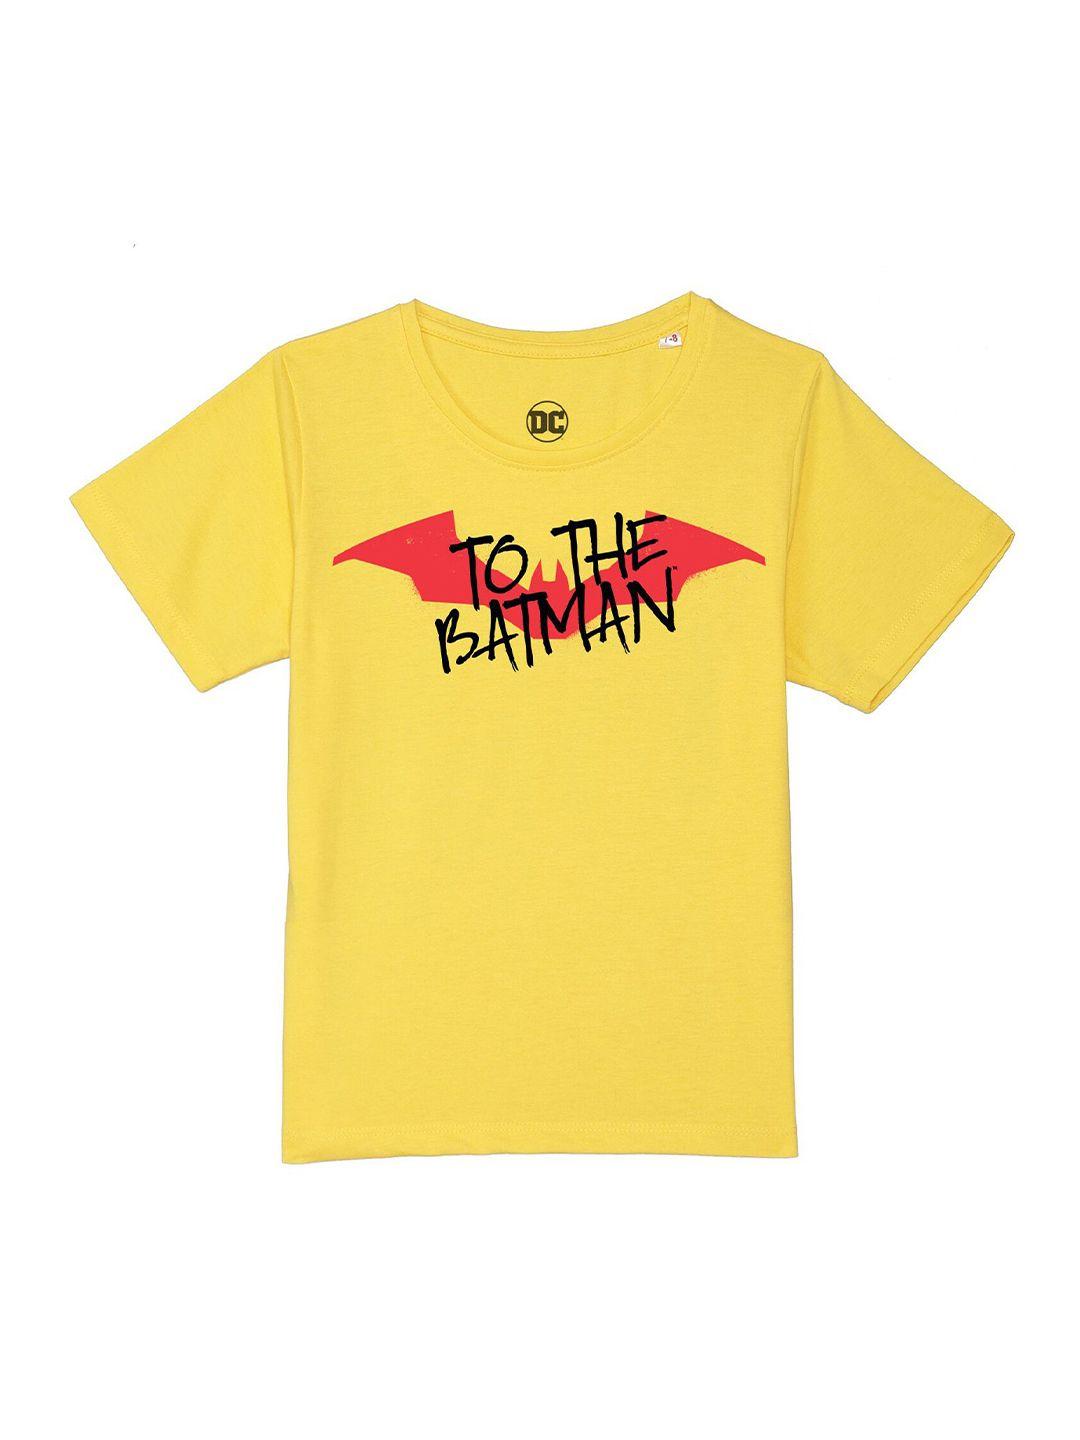 dc by wear your mind boys yellow & black typography batman printed t-shirt